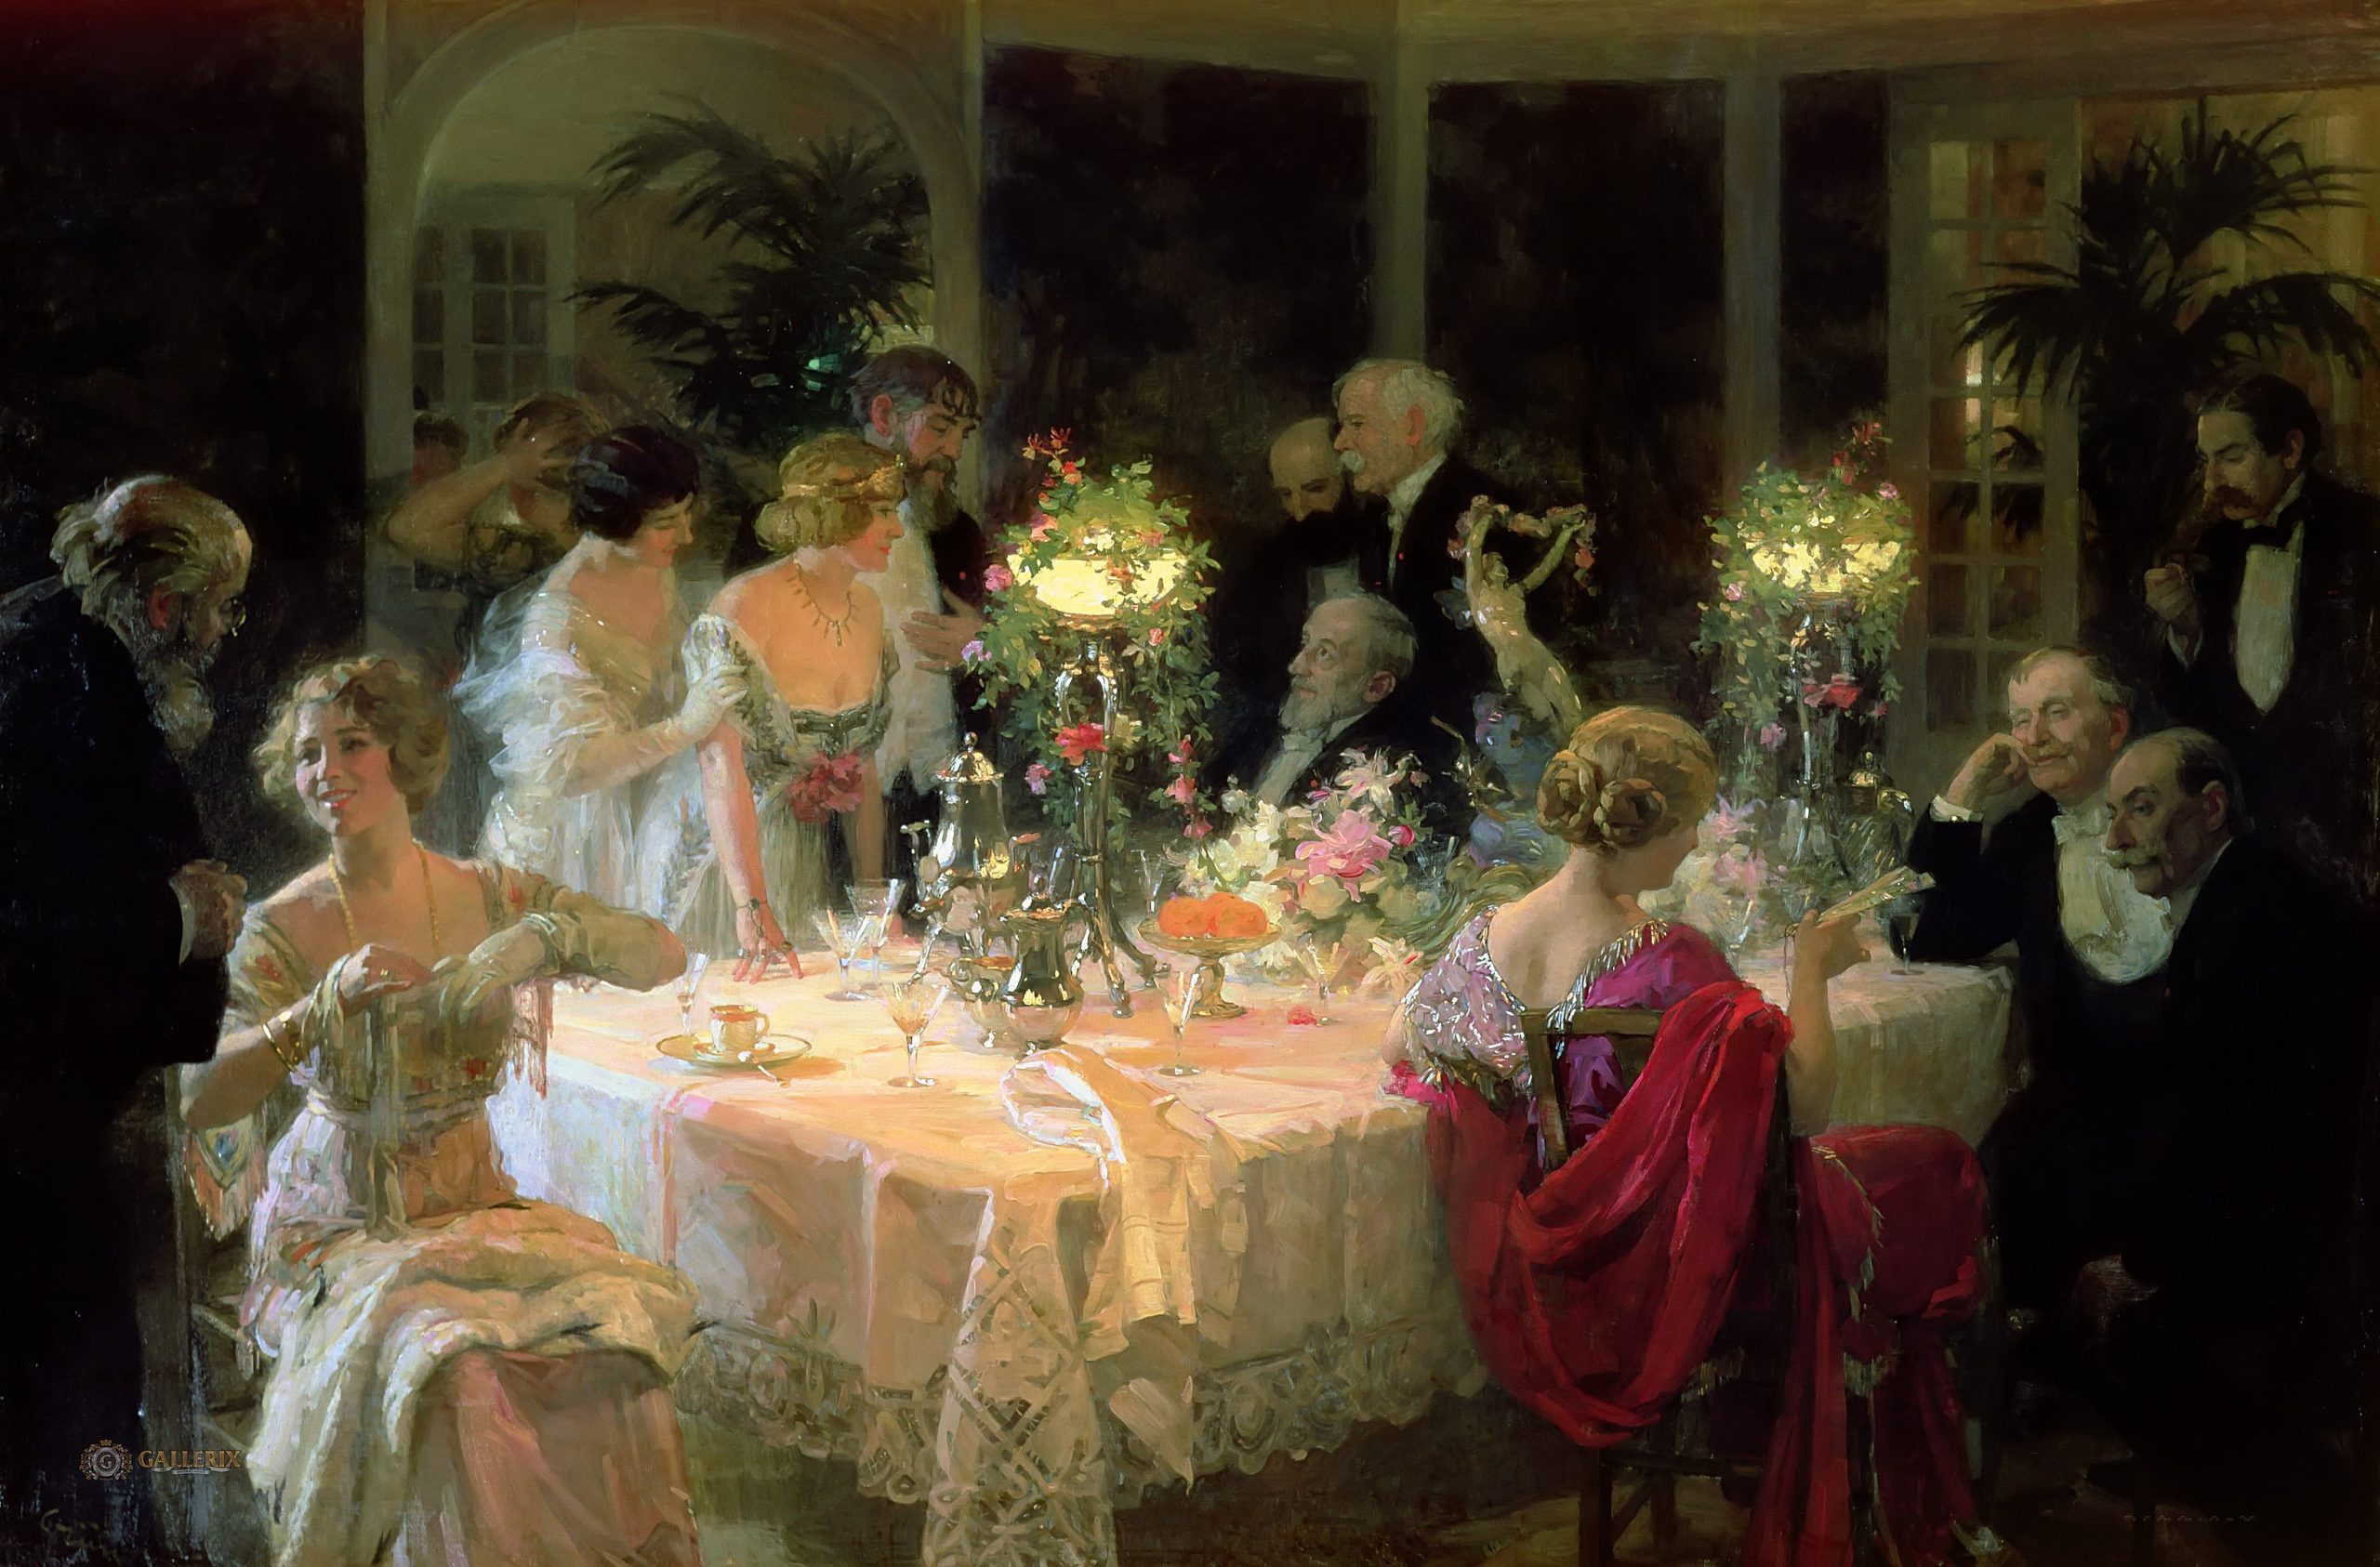 Men and women in formal attire dining indoors